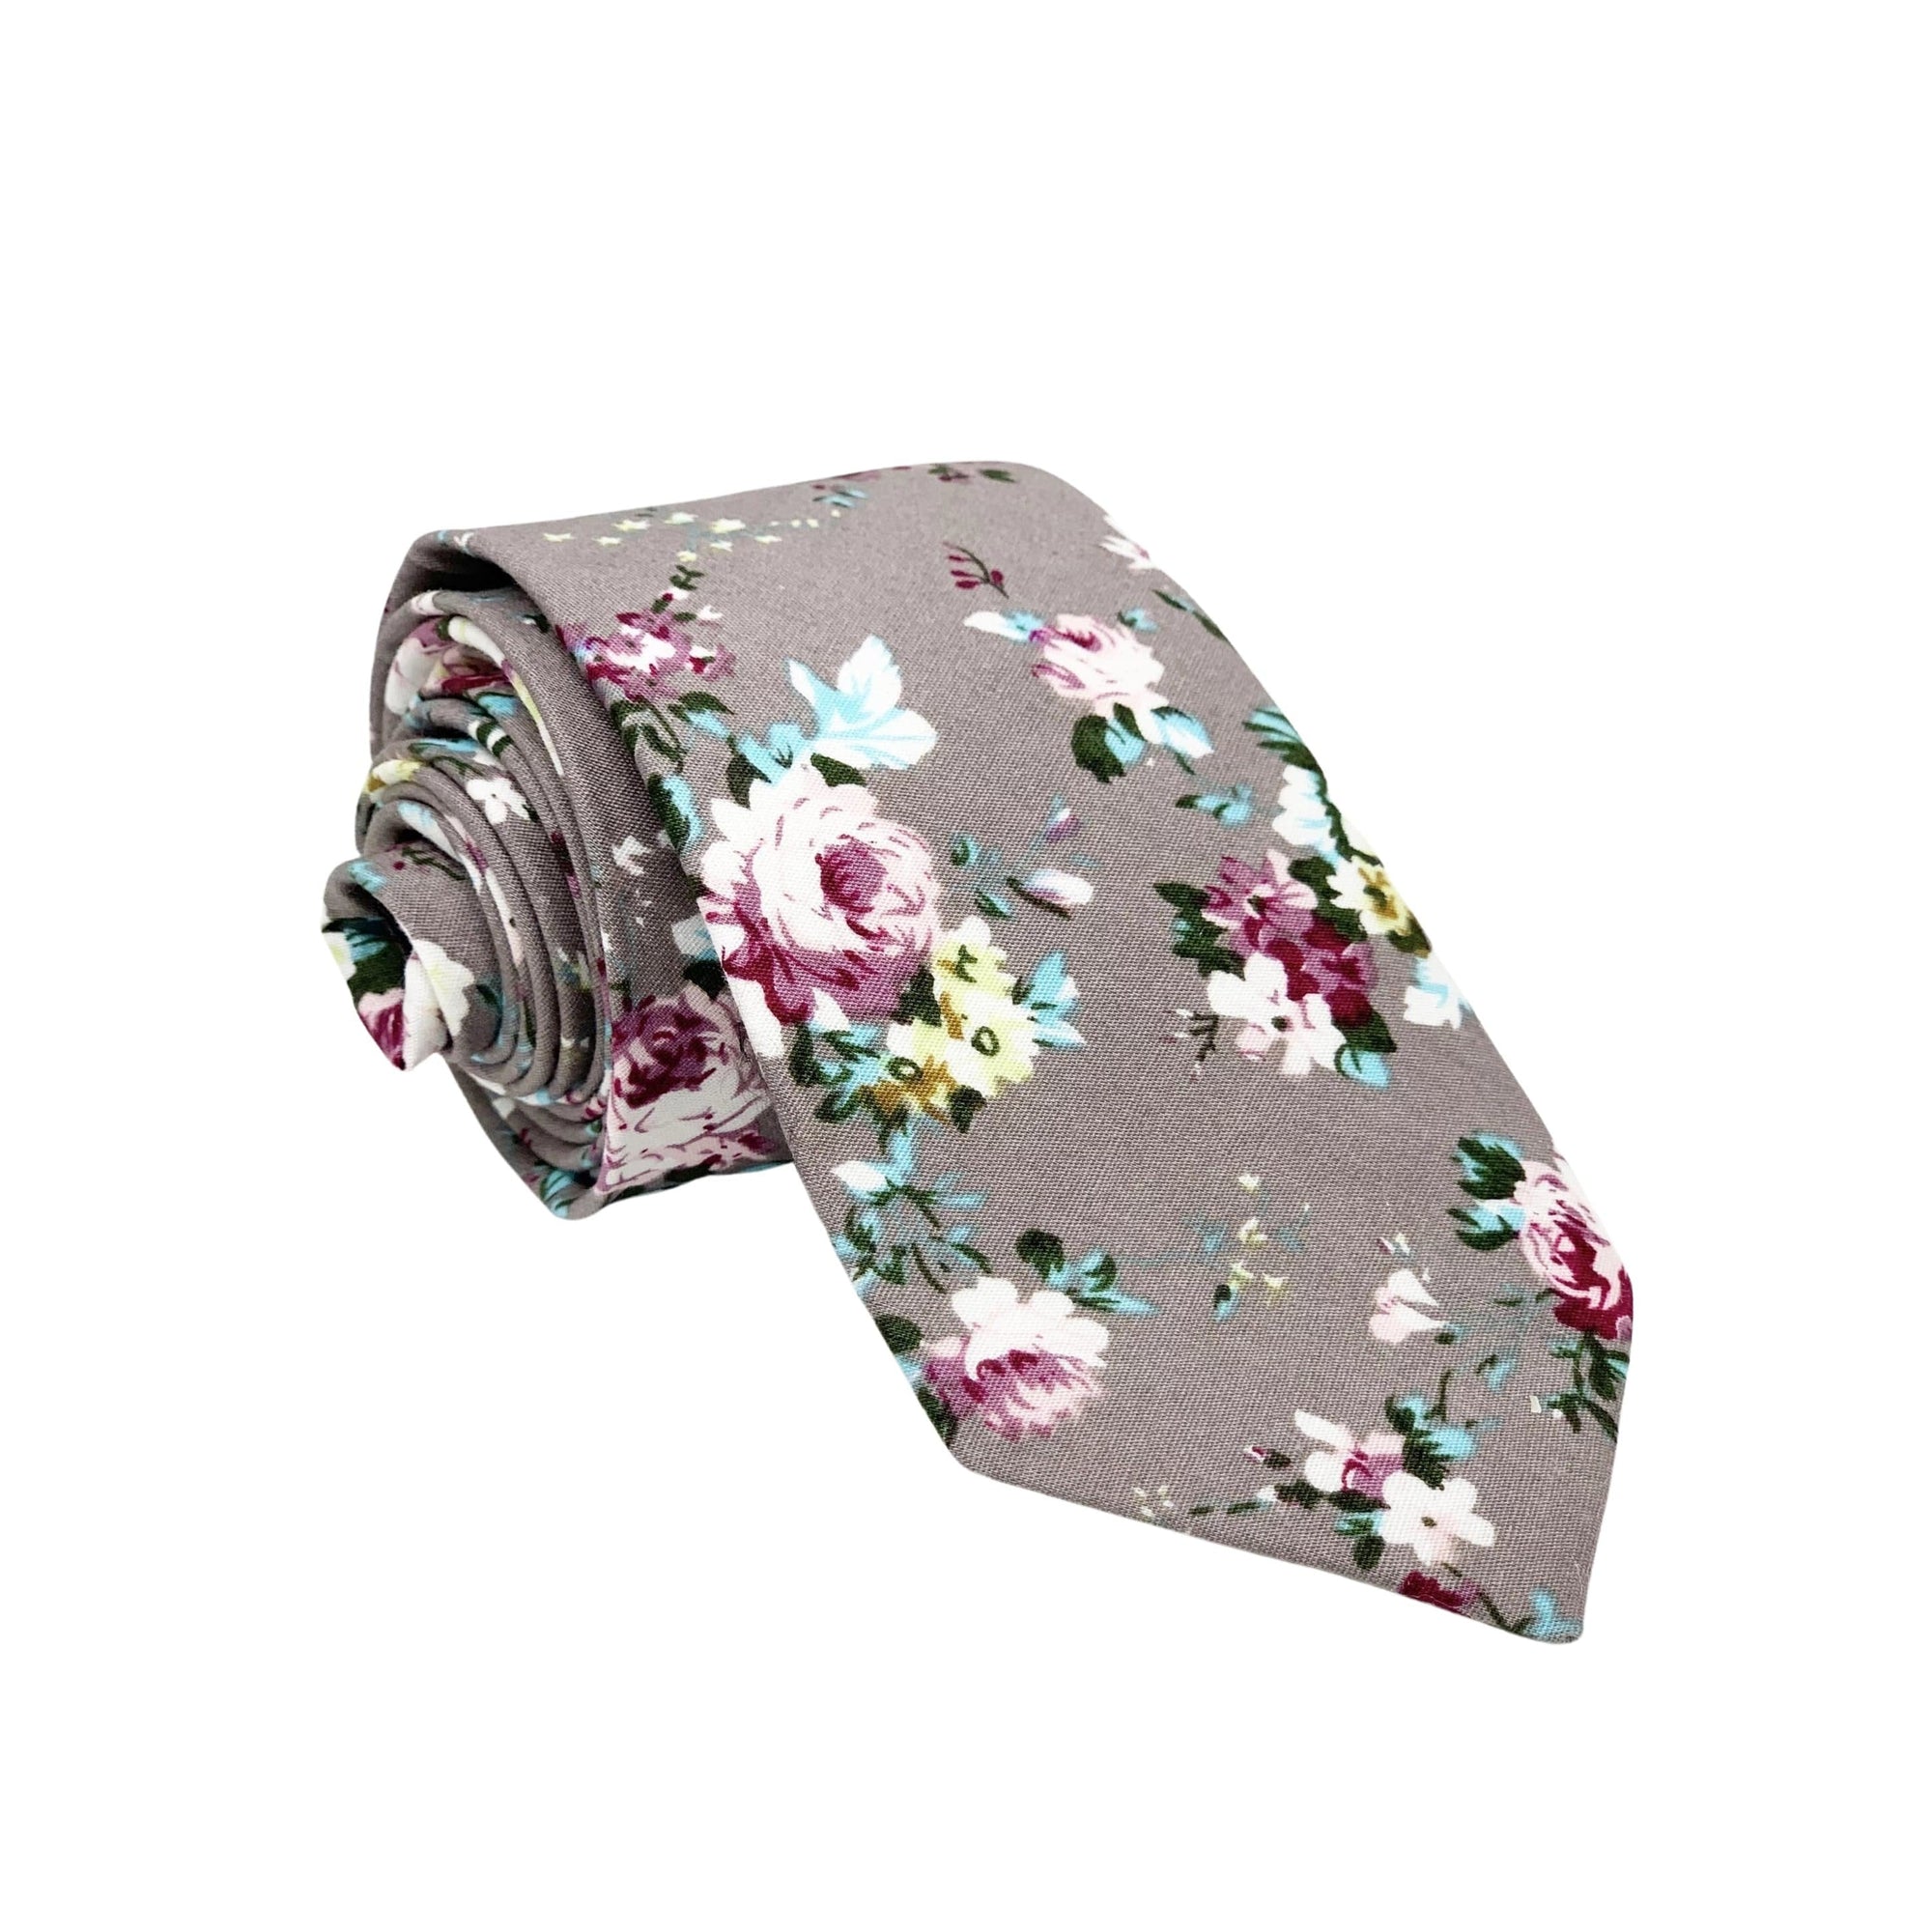 Gray Floral Tie 2.36" SANDY - MYTIESHOP-Neckties-Gray Floral Tie Men’s Floral floral pocket squares for weddings and events, great for prom and anniversary gifts. Mens floral handkerchief near me us-Mytieshop. Skinny ties for weddings anniversaries. Father of bride. Groomsmen. Cool skinny neckties for men. Neckwear for prom, missions and fancy events. Gift ideas for men. Anniversaries ideas. Wedding aesthetics. Flower ties. Dry flower ties.